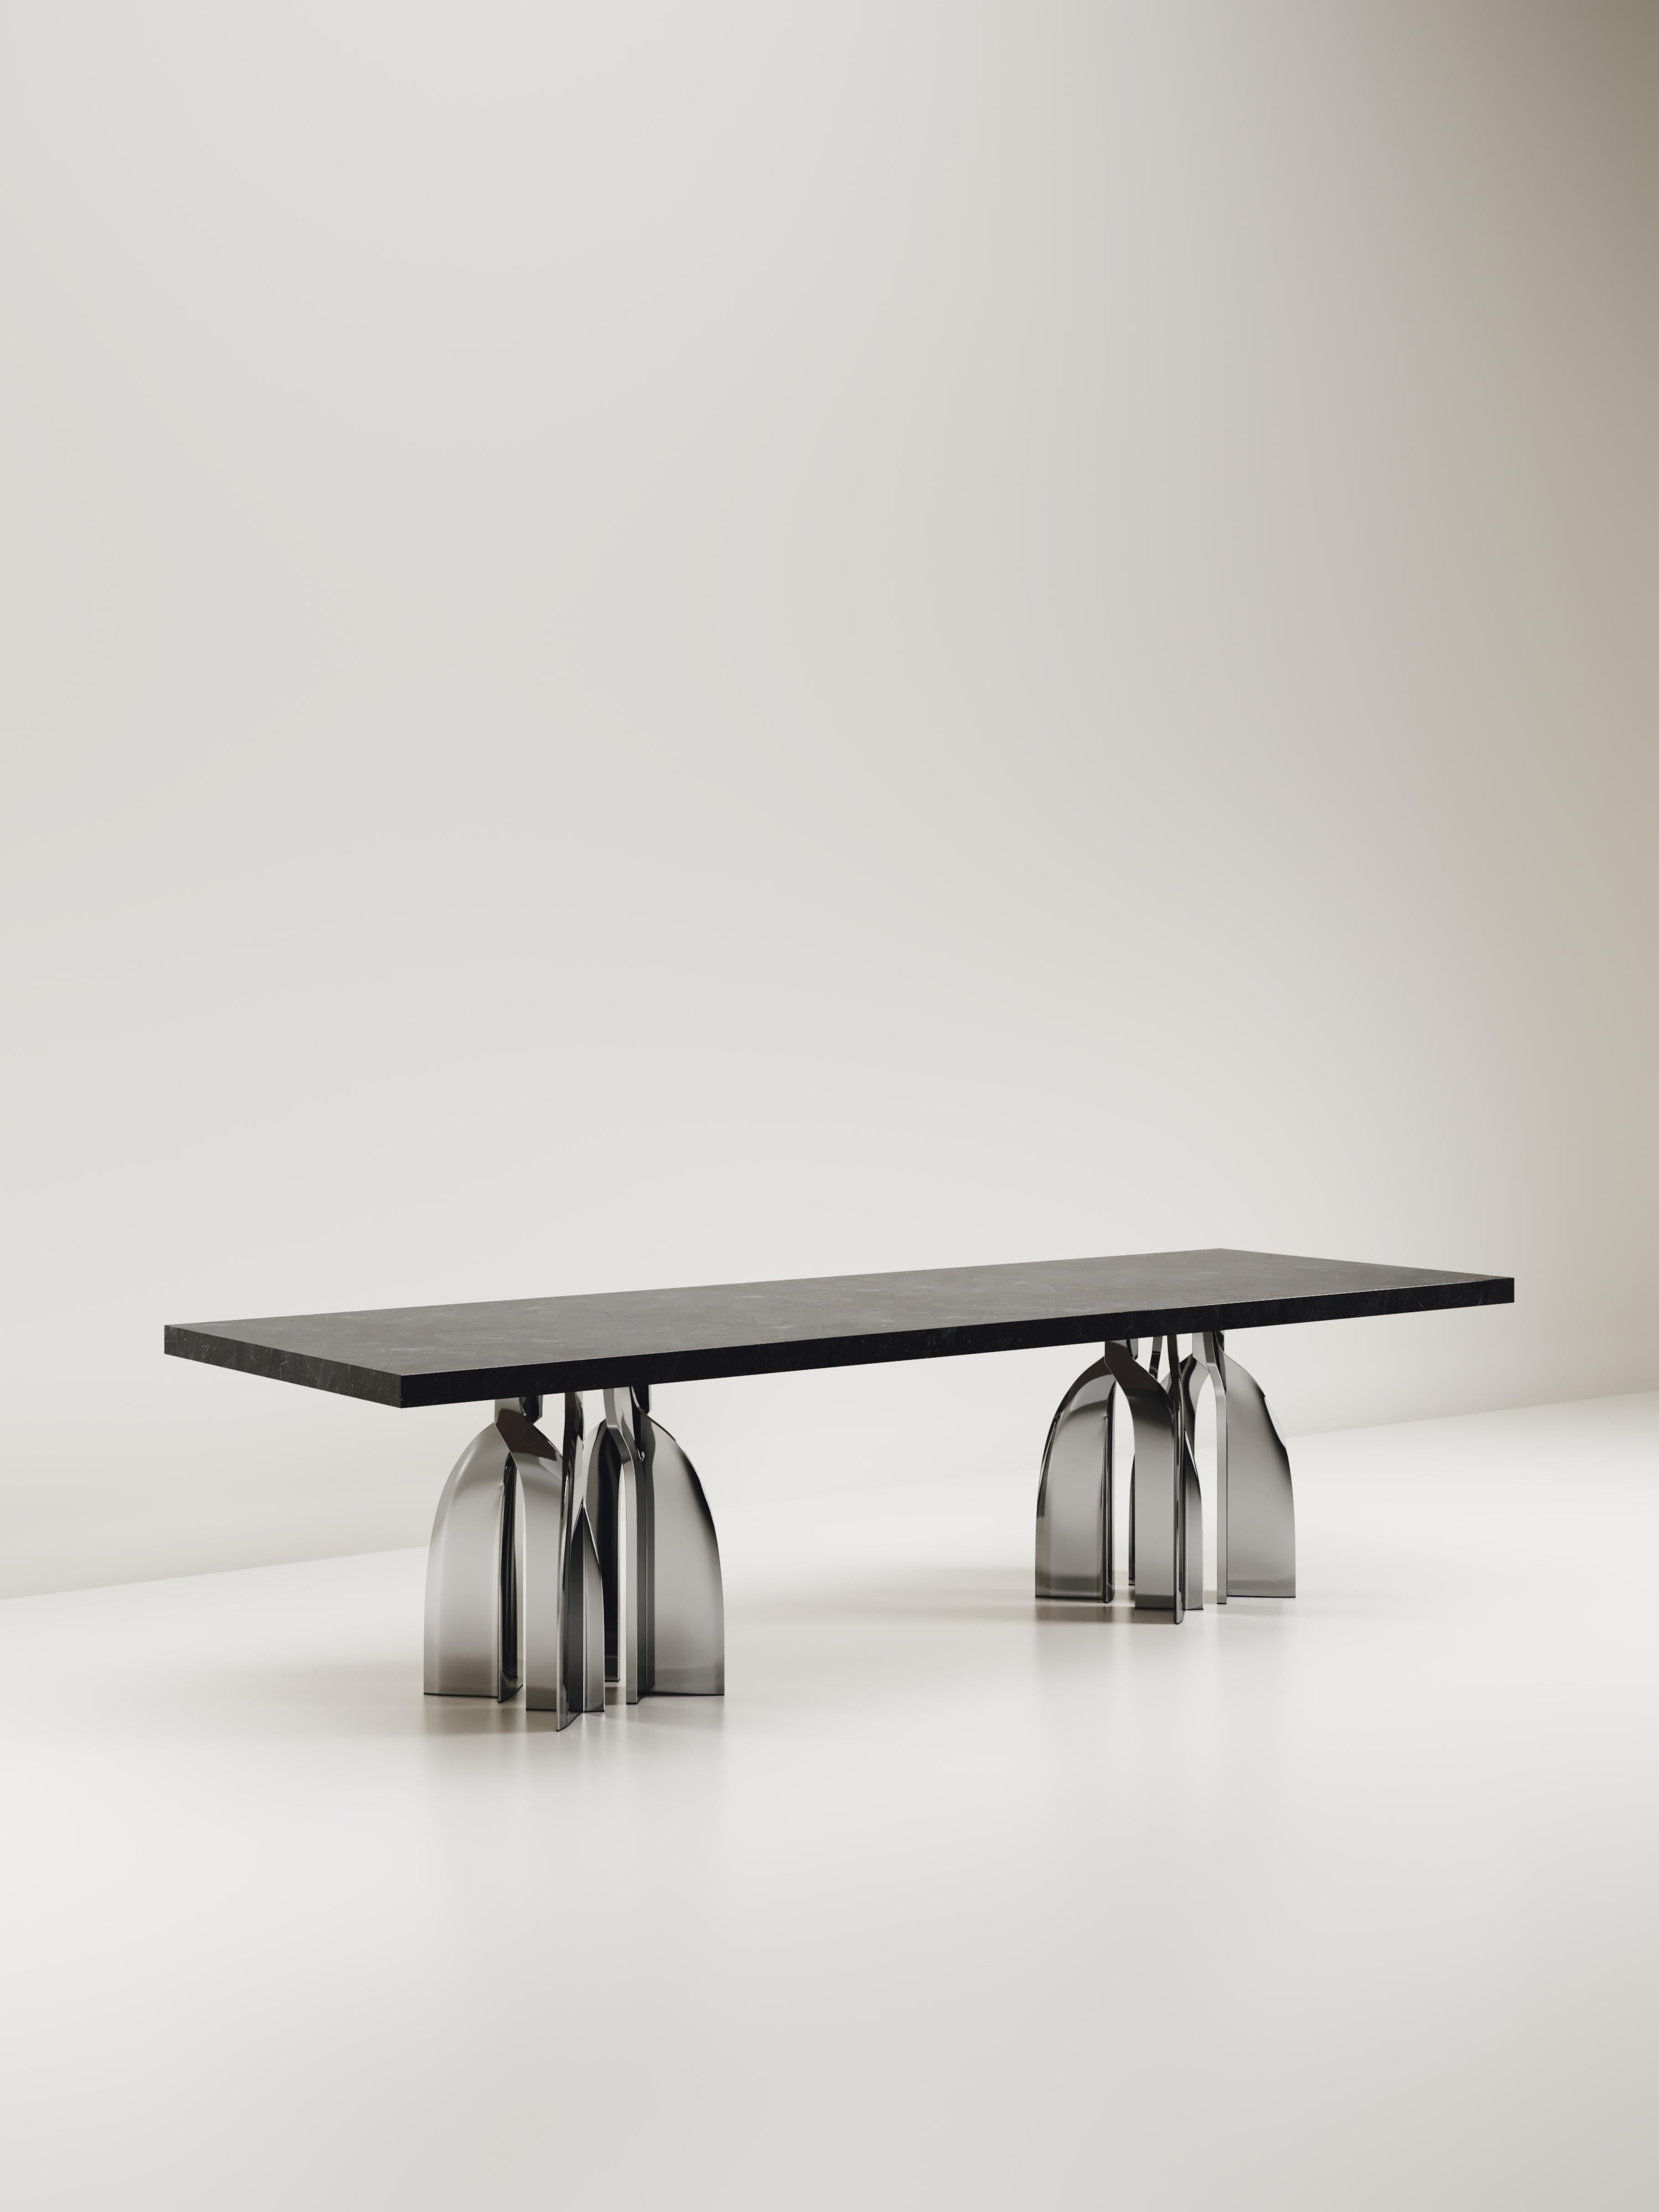 Sculptural Dining Table in Shagreen & Stainless Steel by Kifu Paris In New Condition For Sale In New York, NY